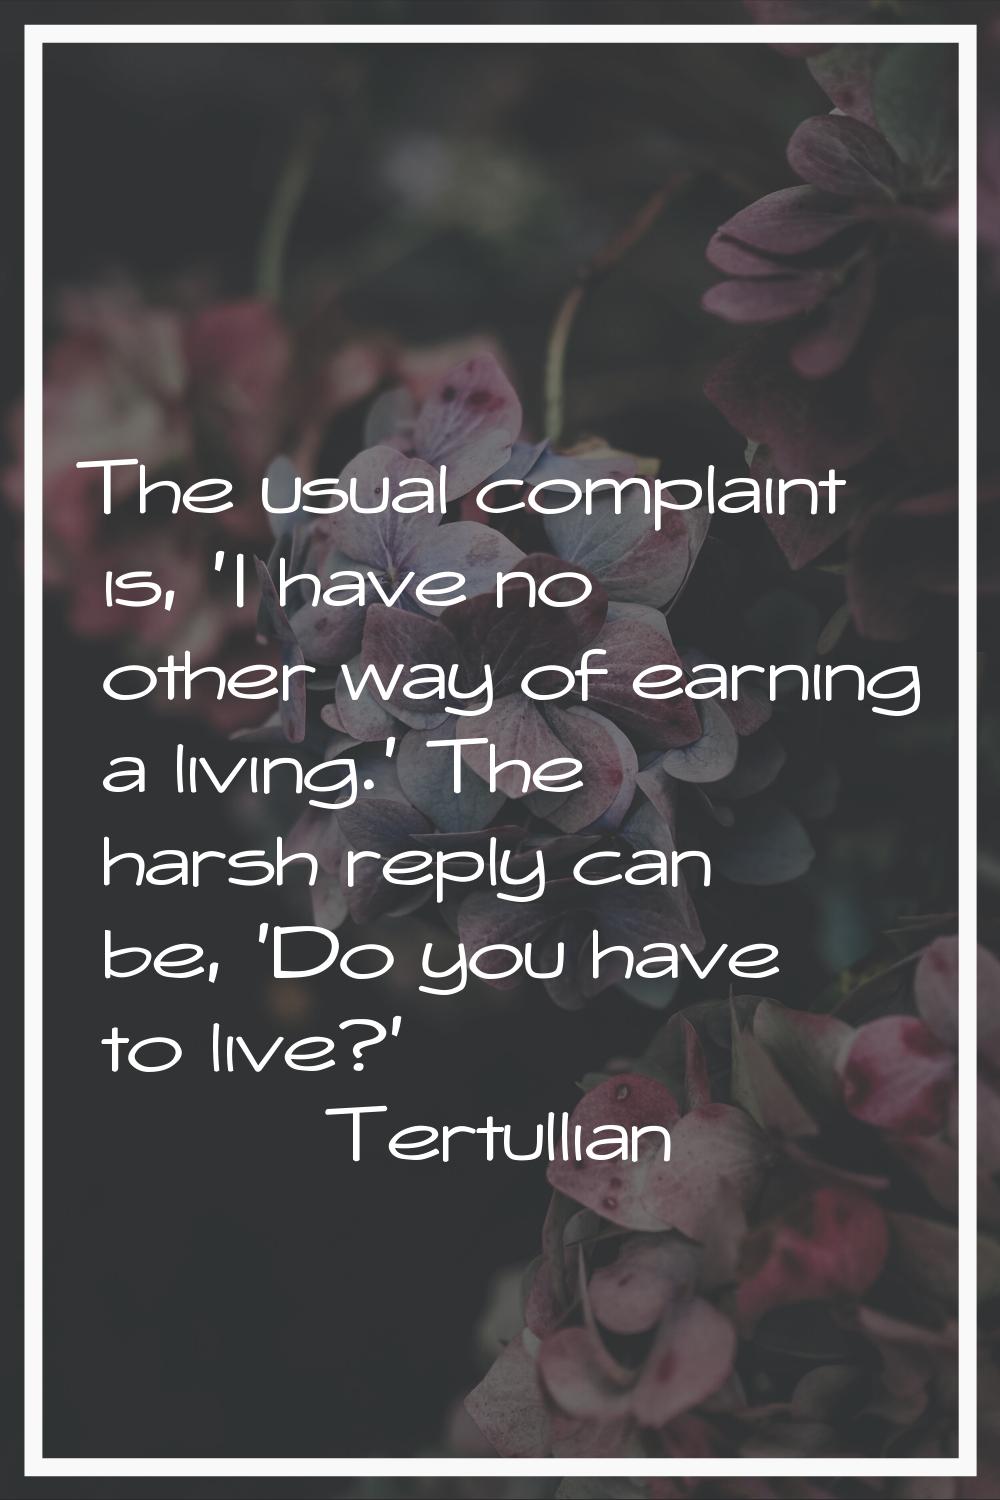 The usual complaint is, 'I have no other way of earning a living.' The harsh reply can be, 'Do you 